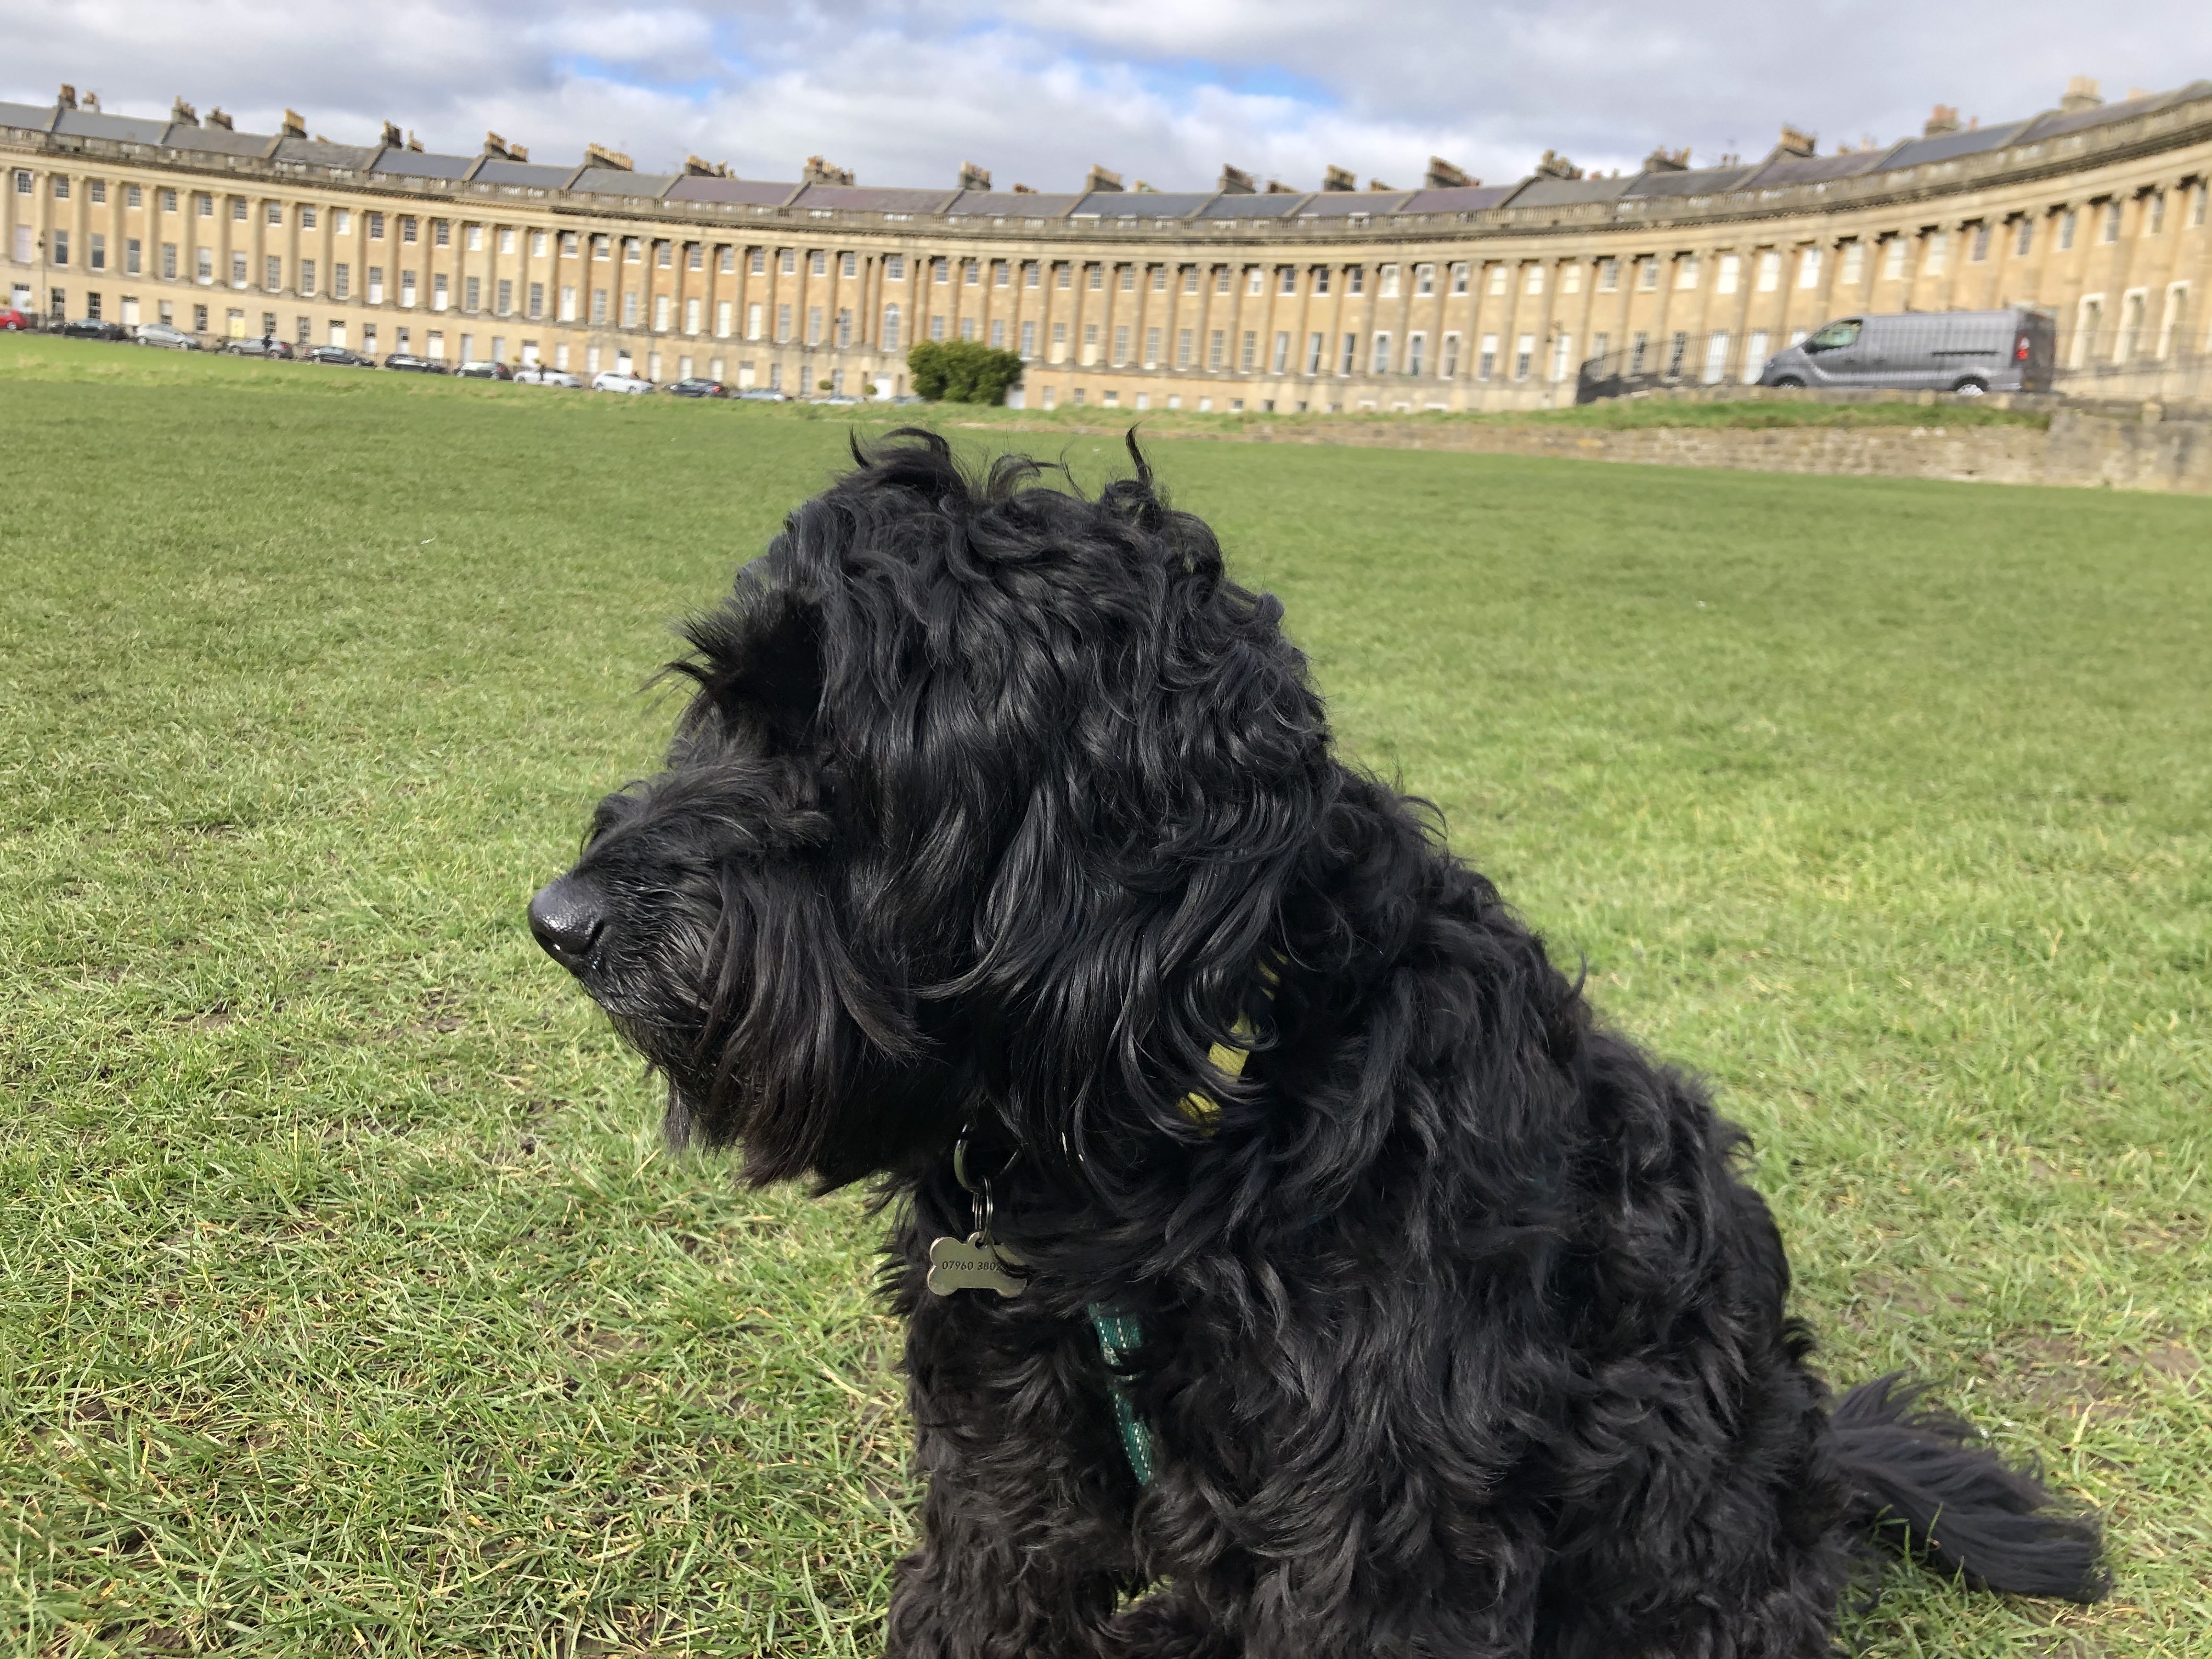 Betty in Royal Crescent - Keith Stuart